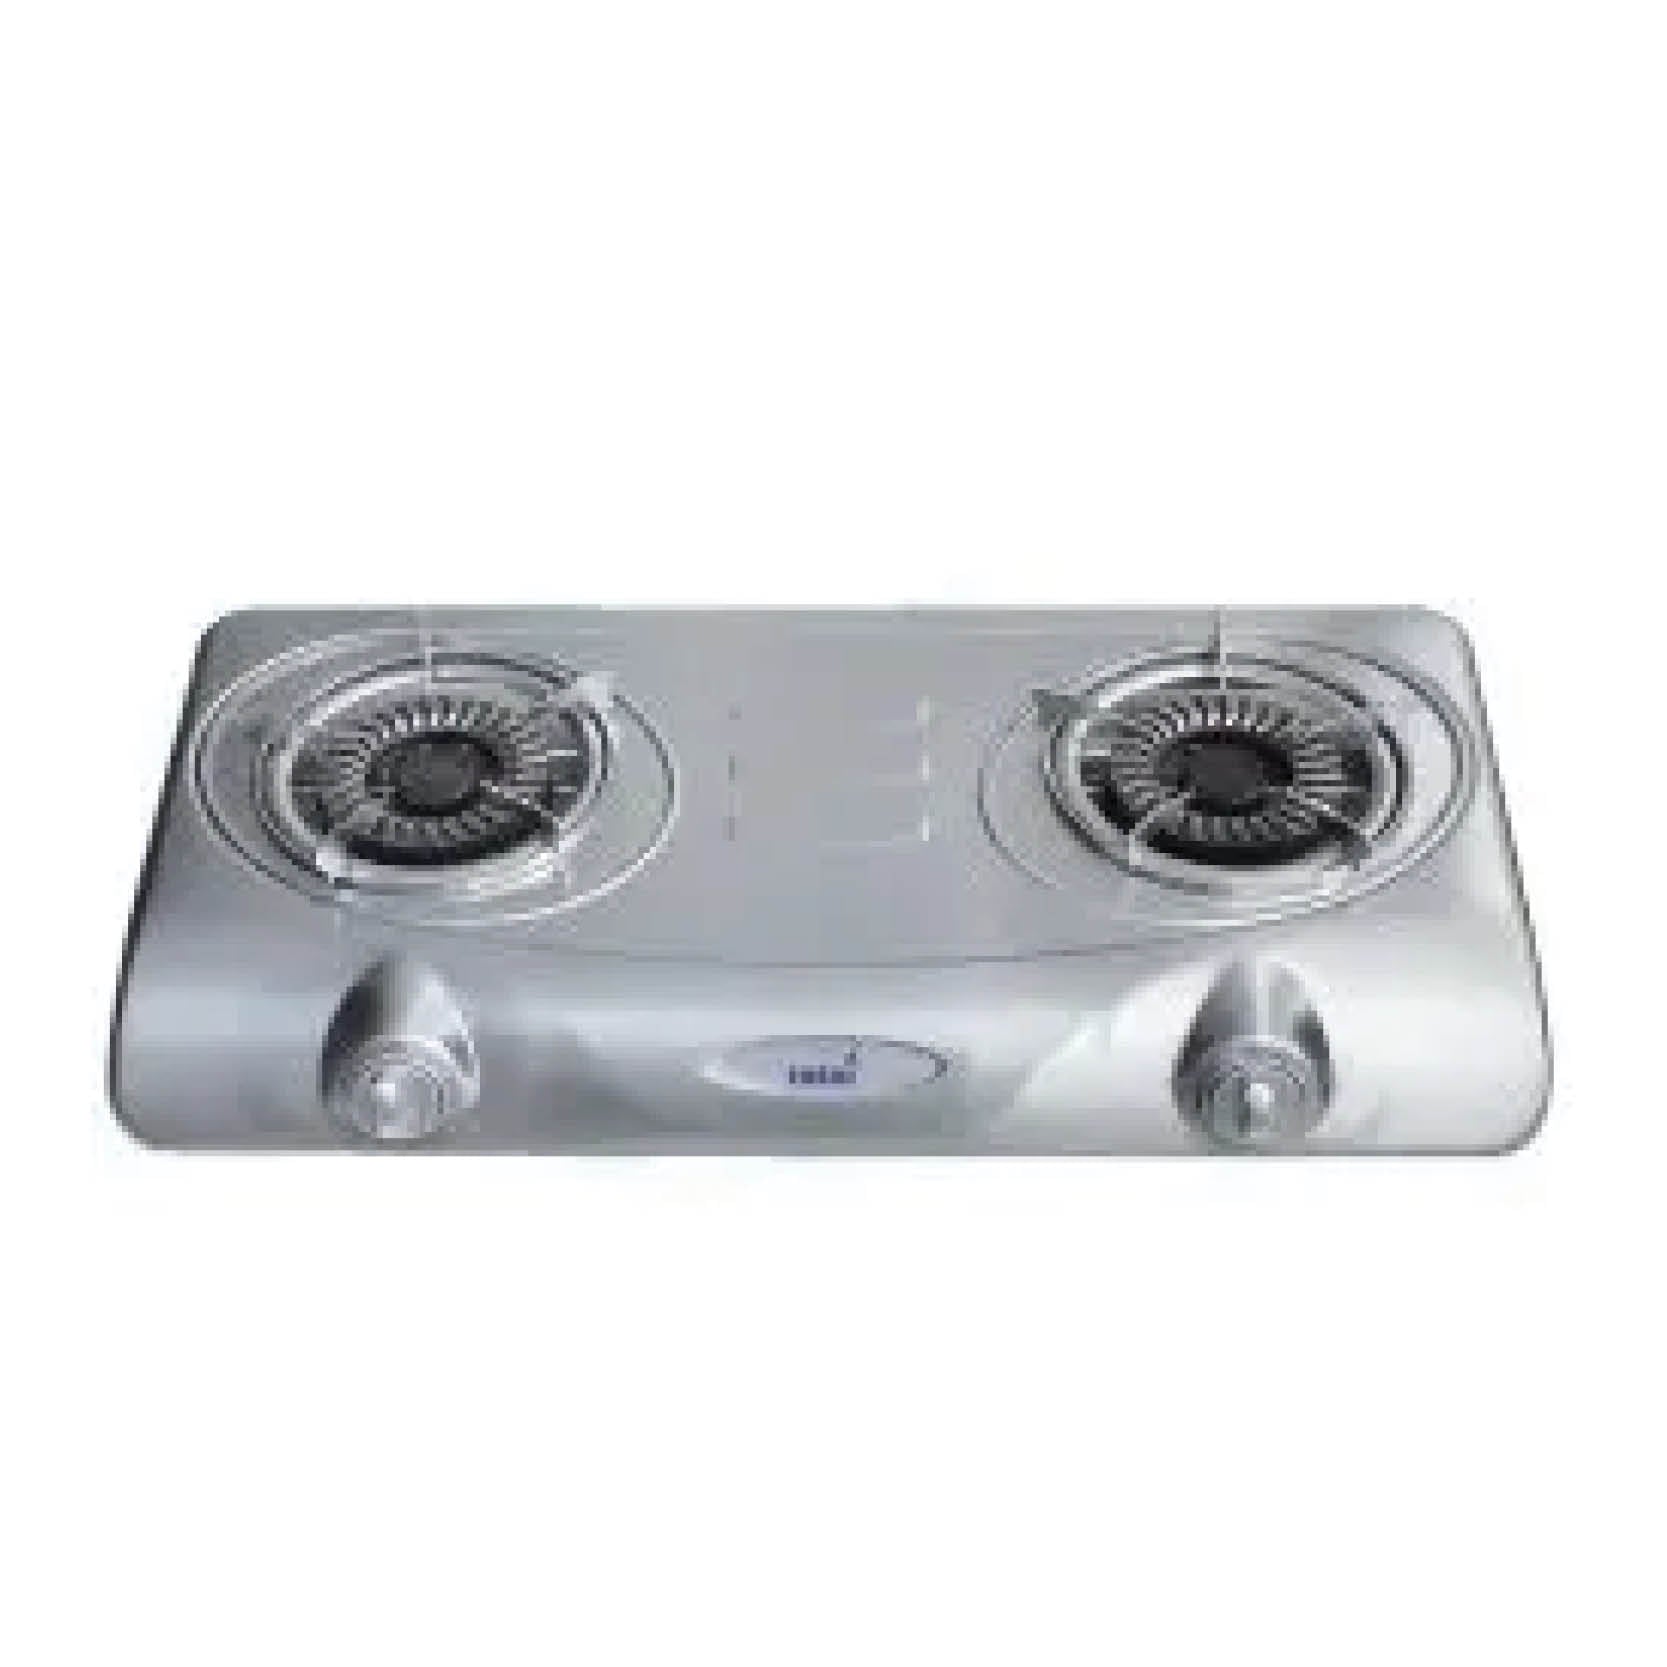 Gas Stove 2 Burner Stainless Steel Port Hob 26/012A Totai